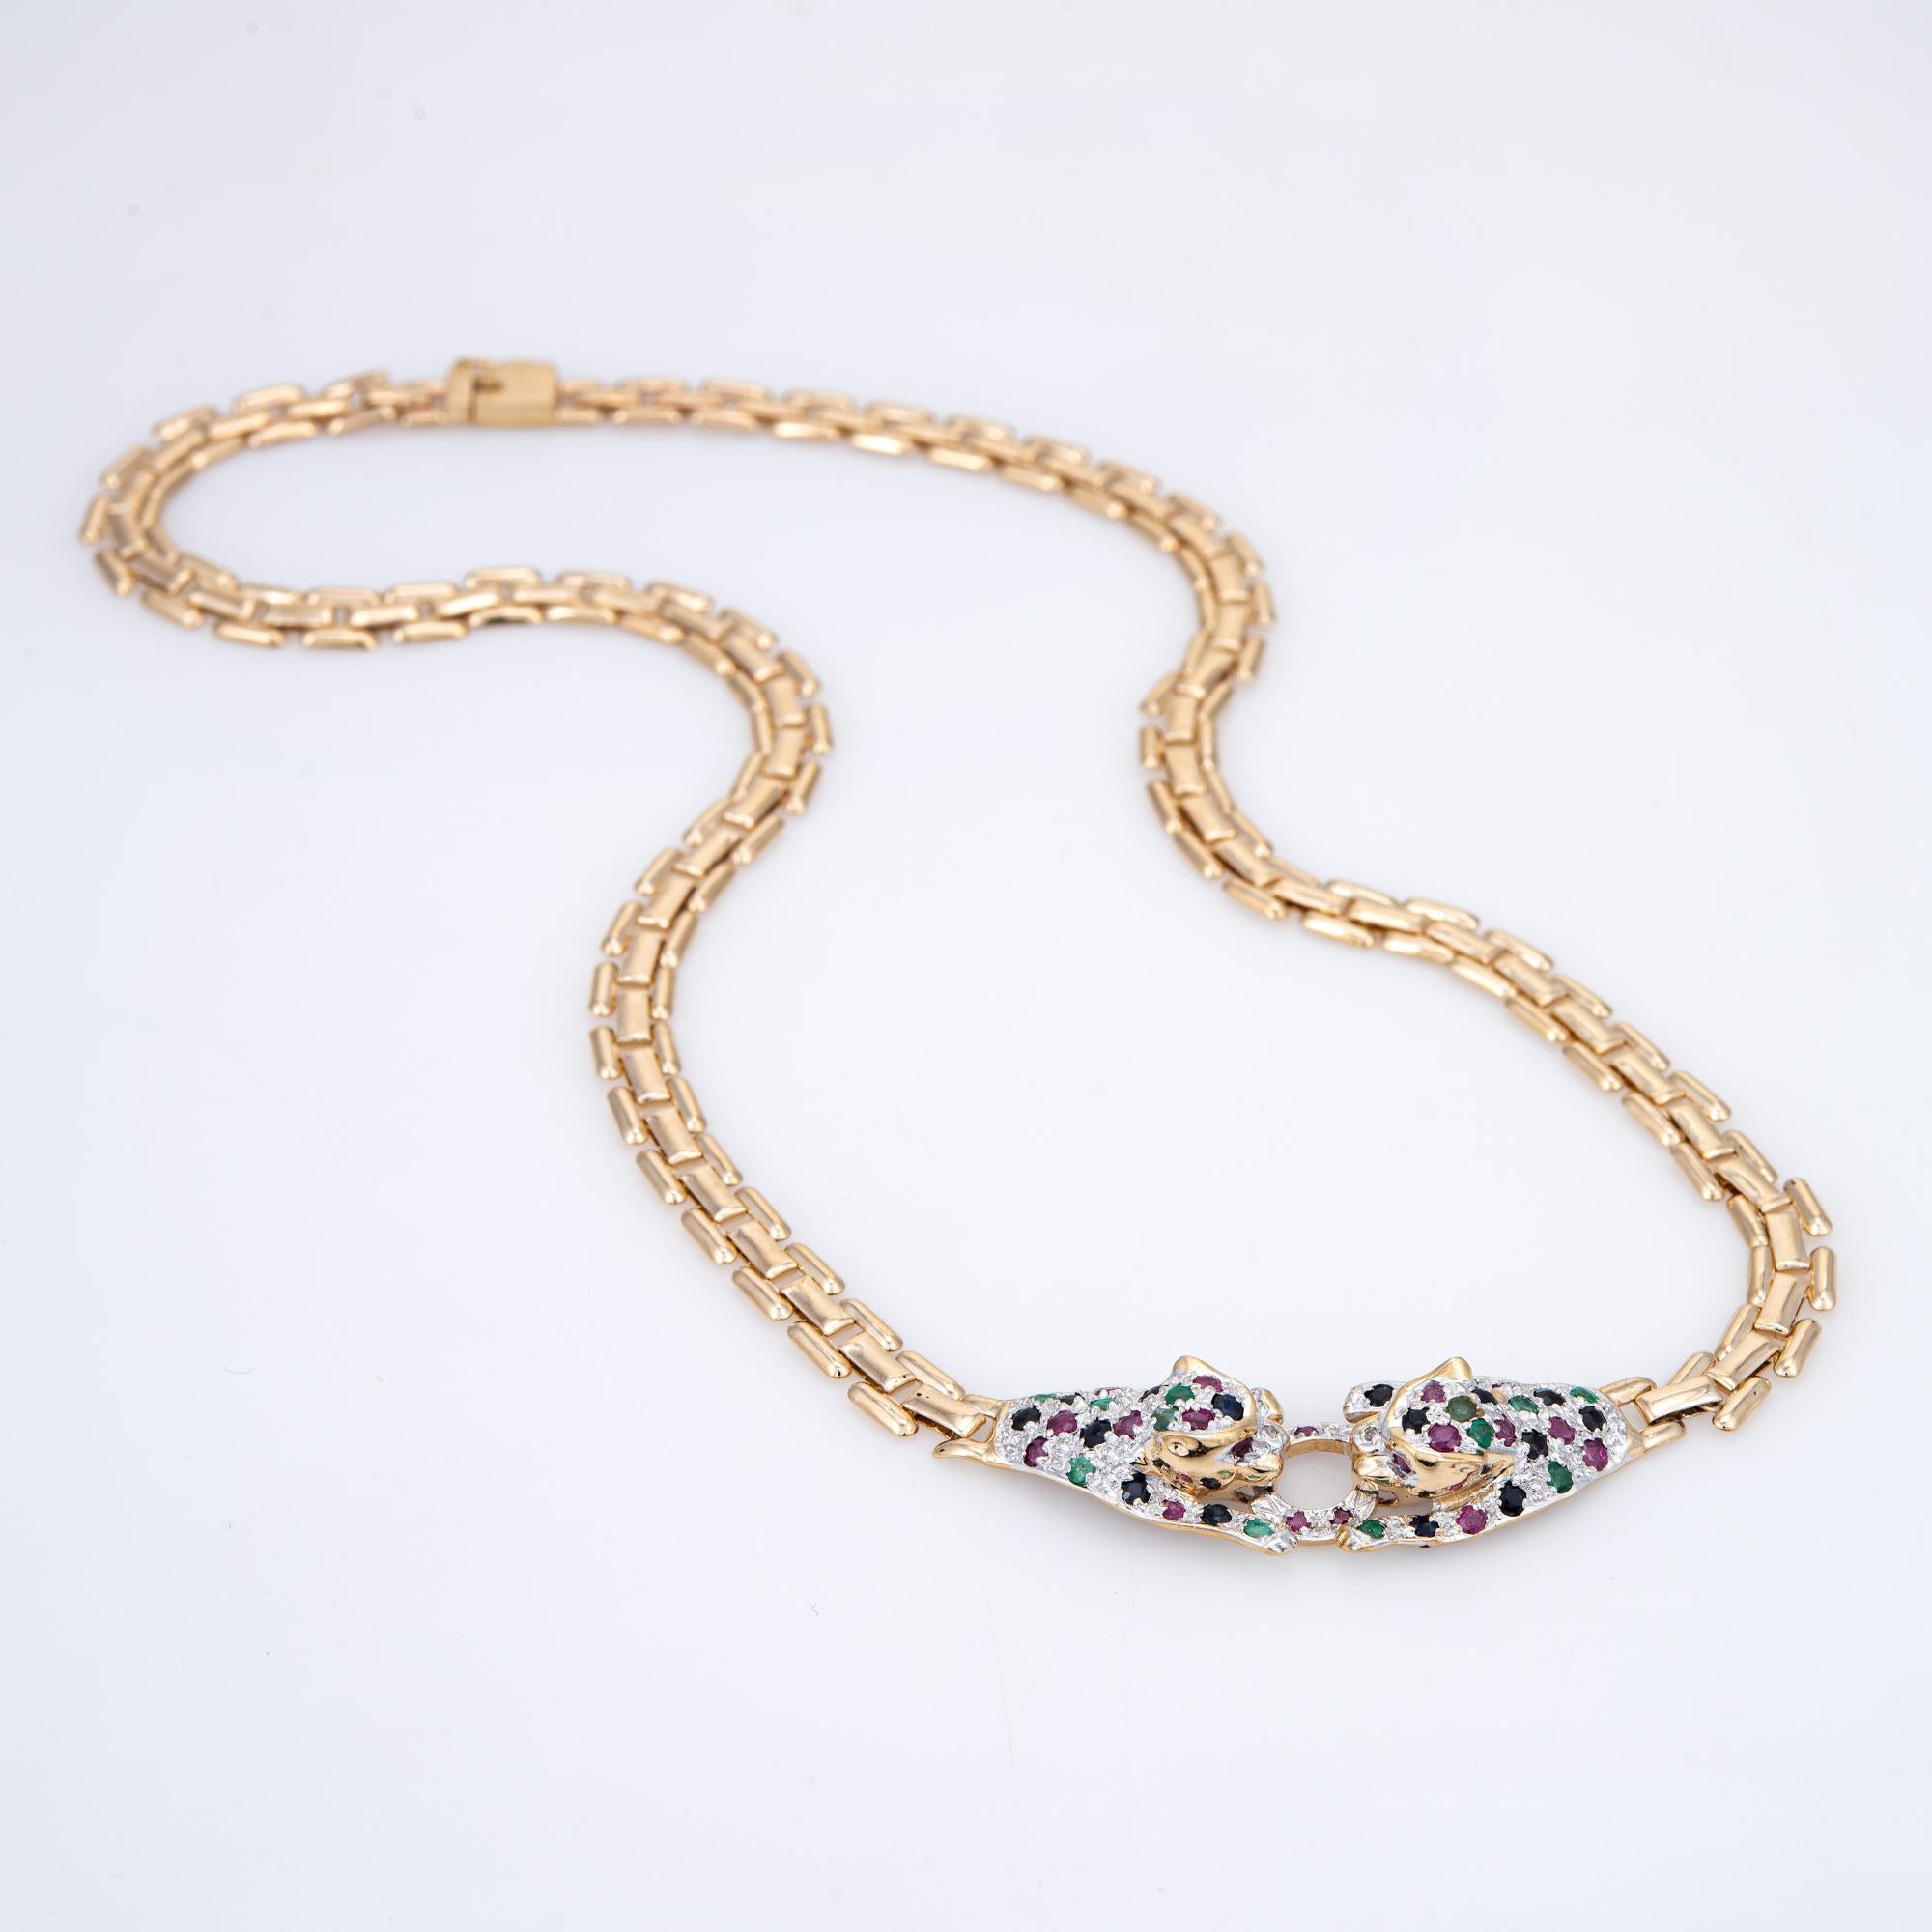 Finely detailed gemstone leopard necklace crafted in 14k yellow gold (circa 1980s).  

Sapphires, emeralds and rubies total an estimated 1.50 carats. The gemstones are in very good condition and free of cracks or chips.

The choker length necklace